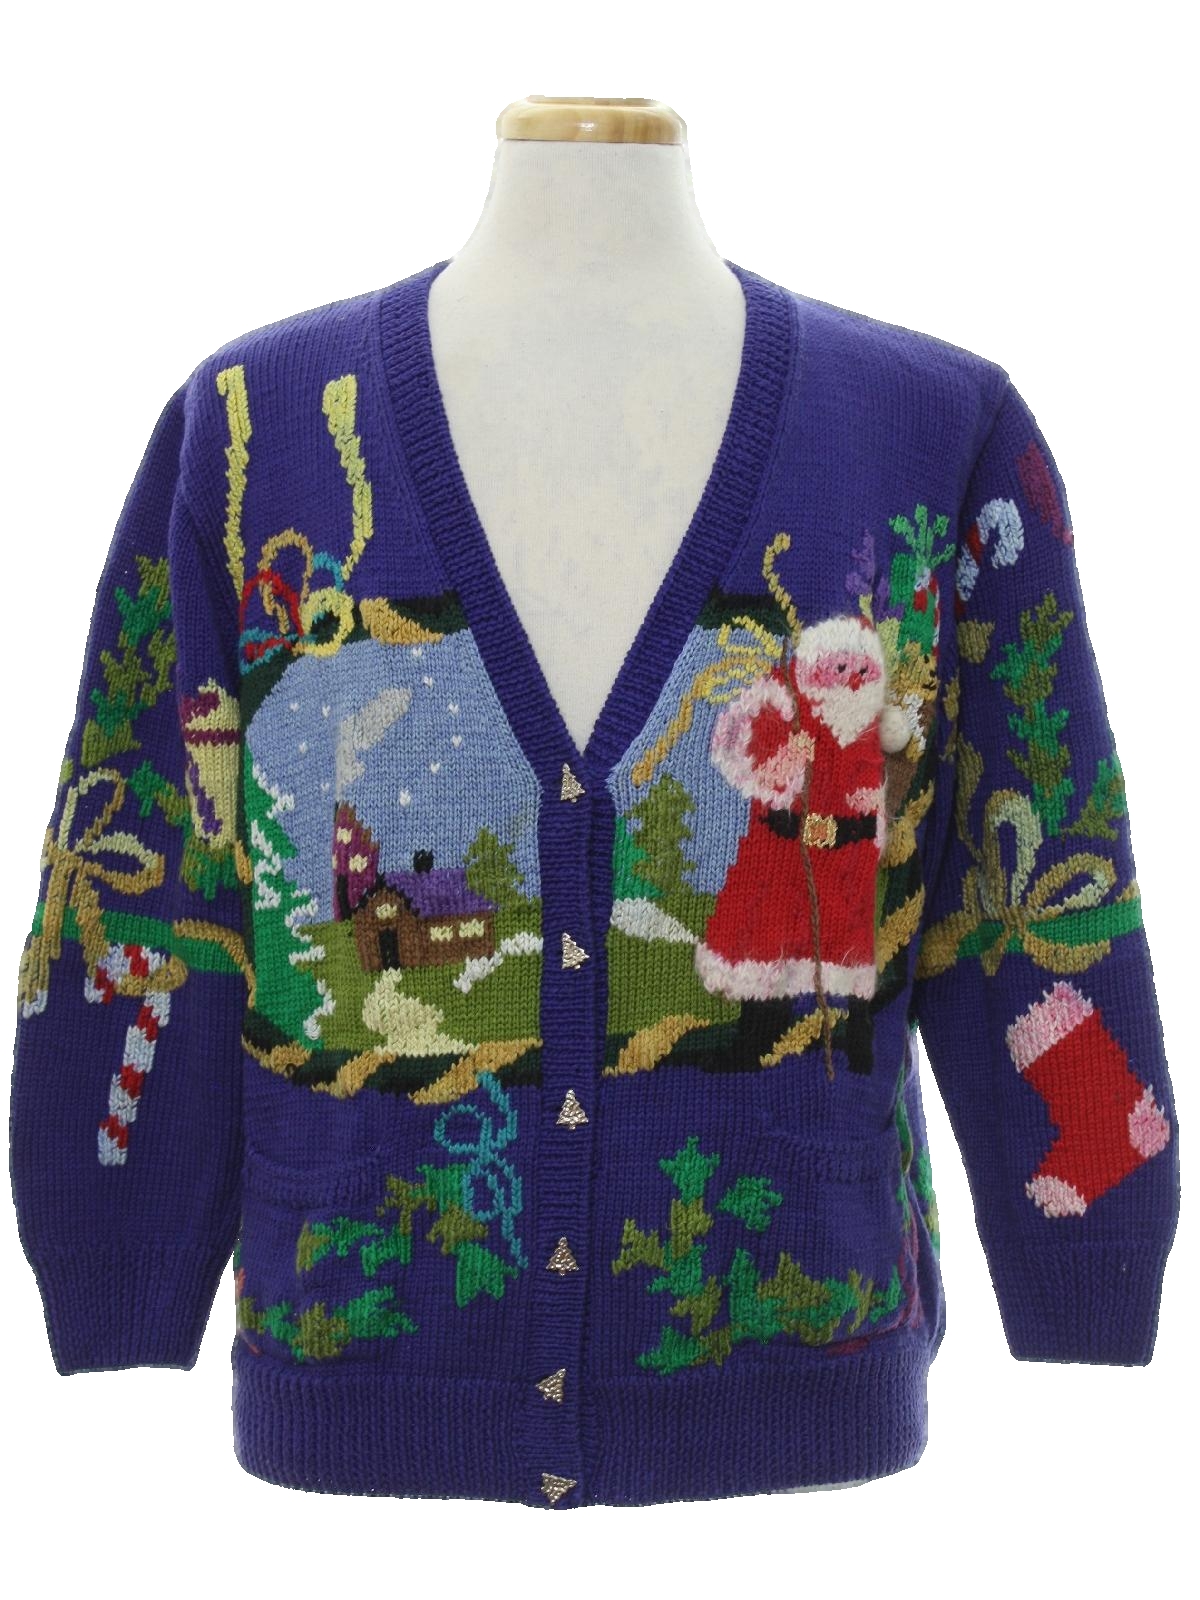 80s Vintage Ugly Christmas Cardigan Sweater: 80s authentic vintage ...